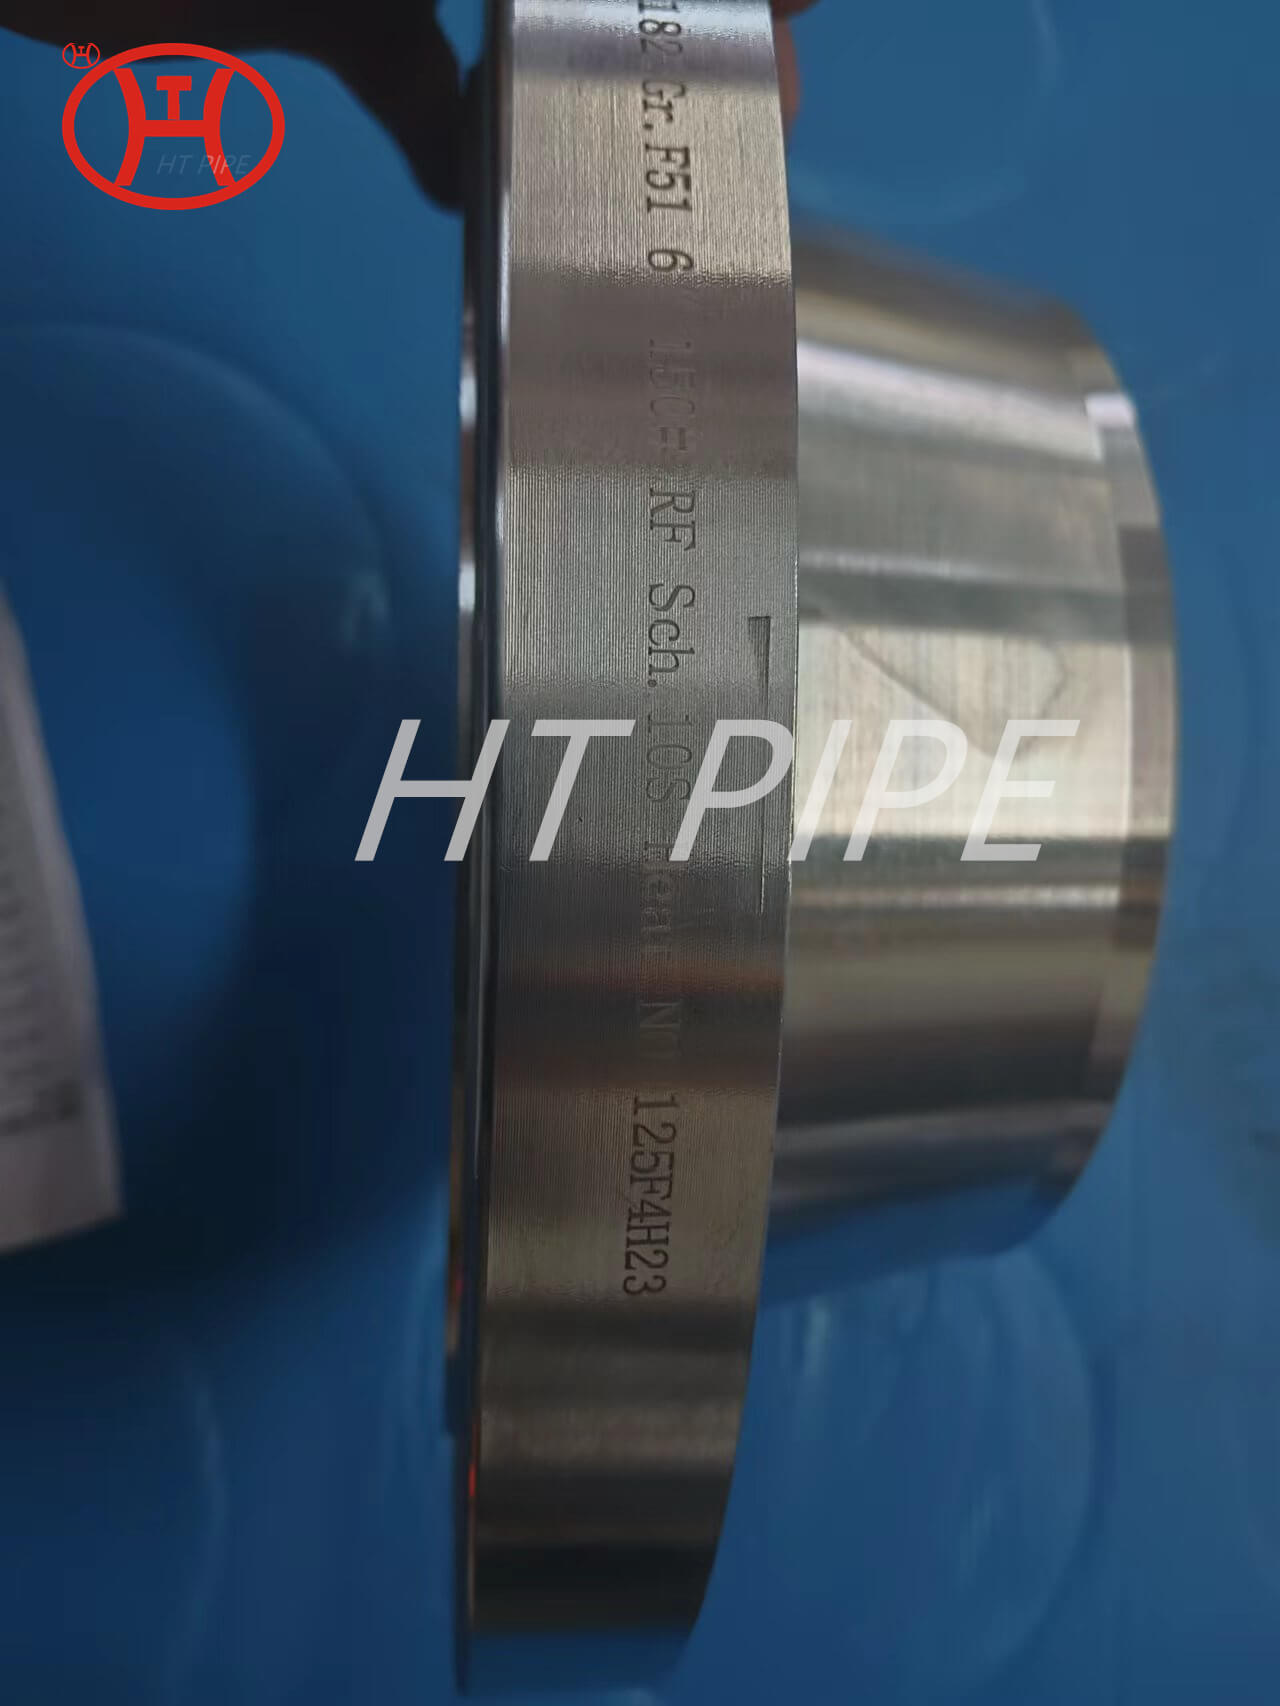 Stainless Steel 304 SO flanges